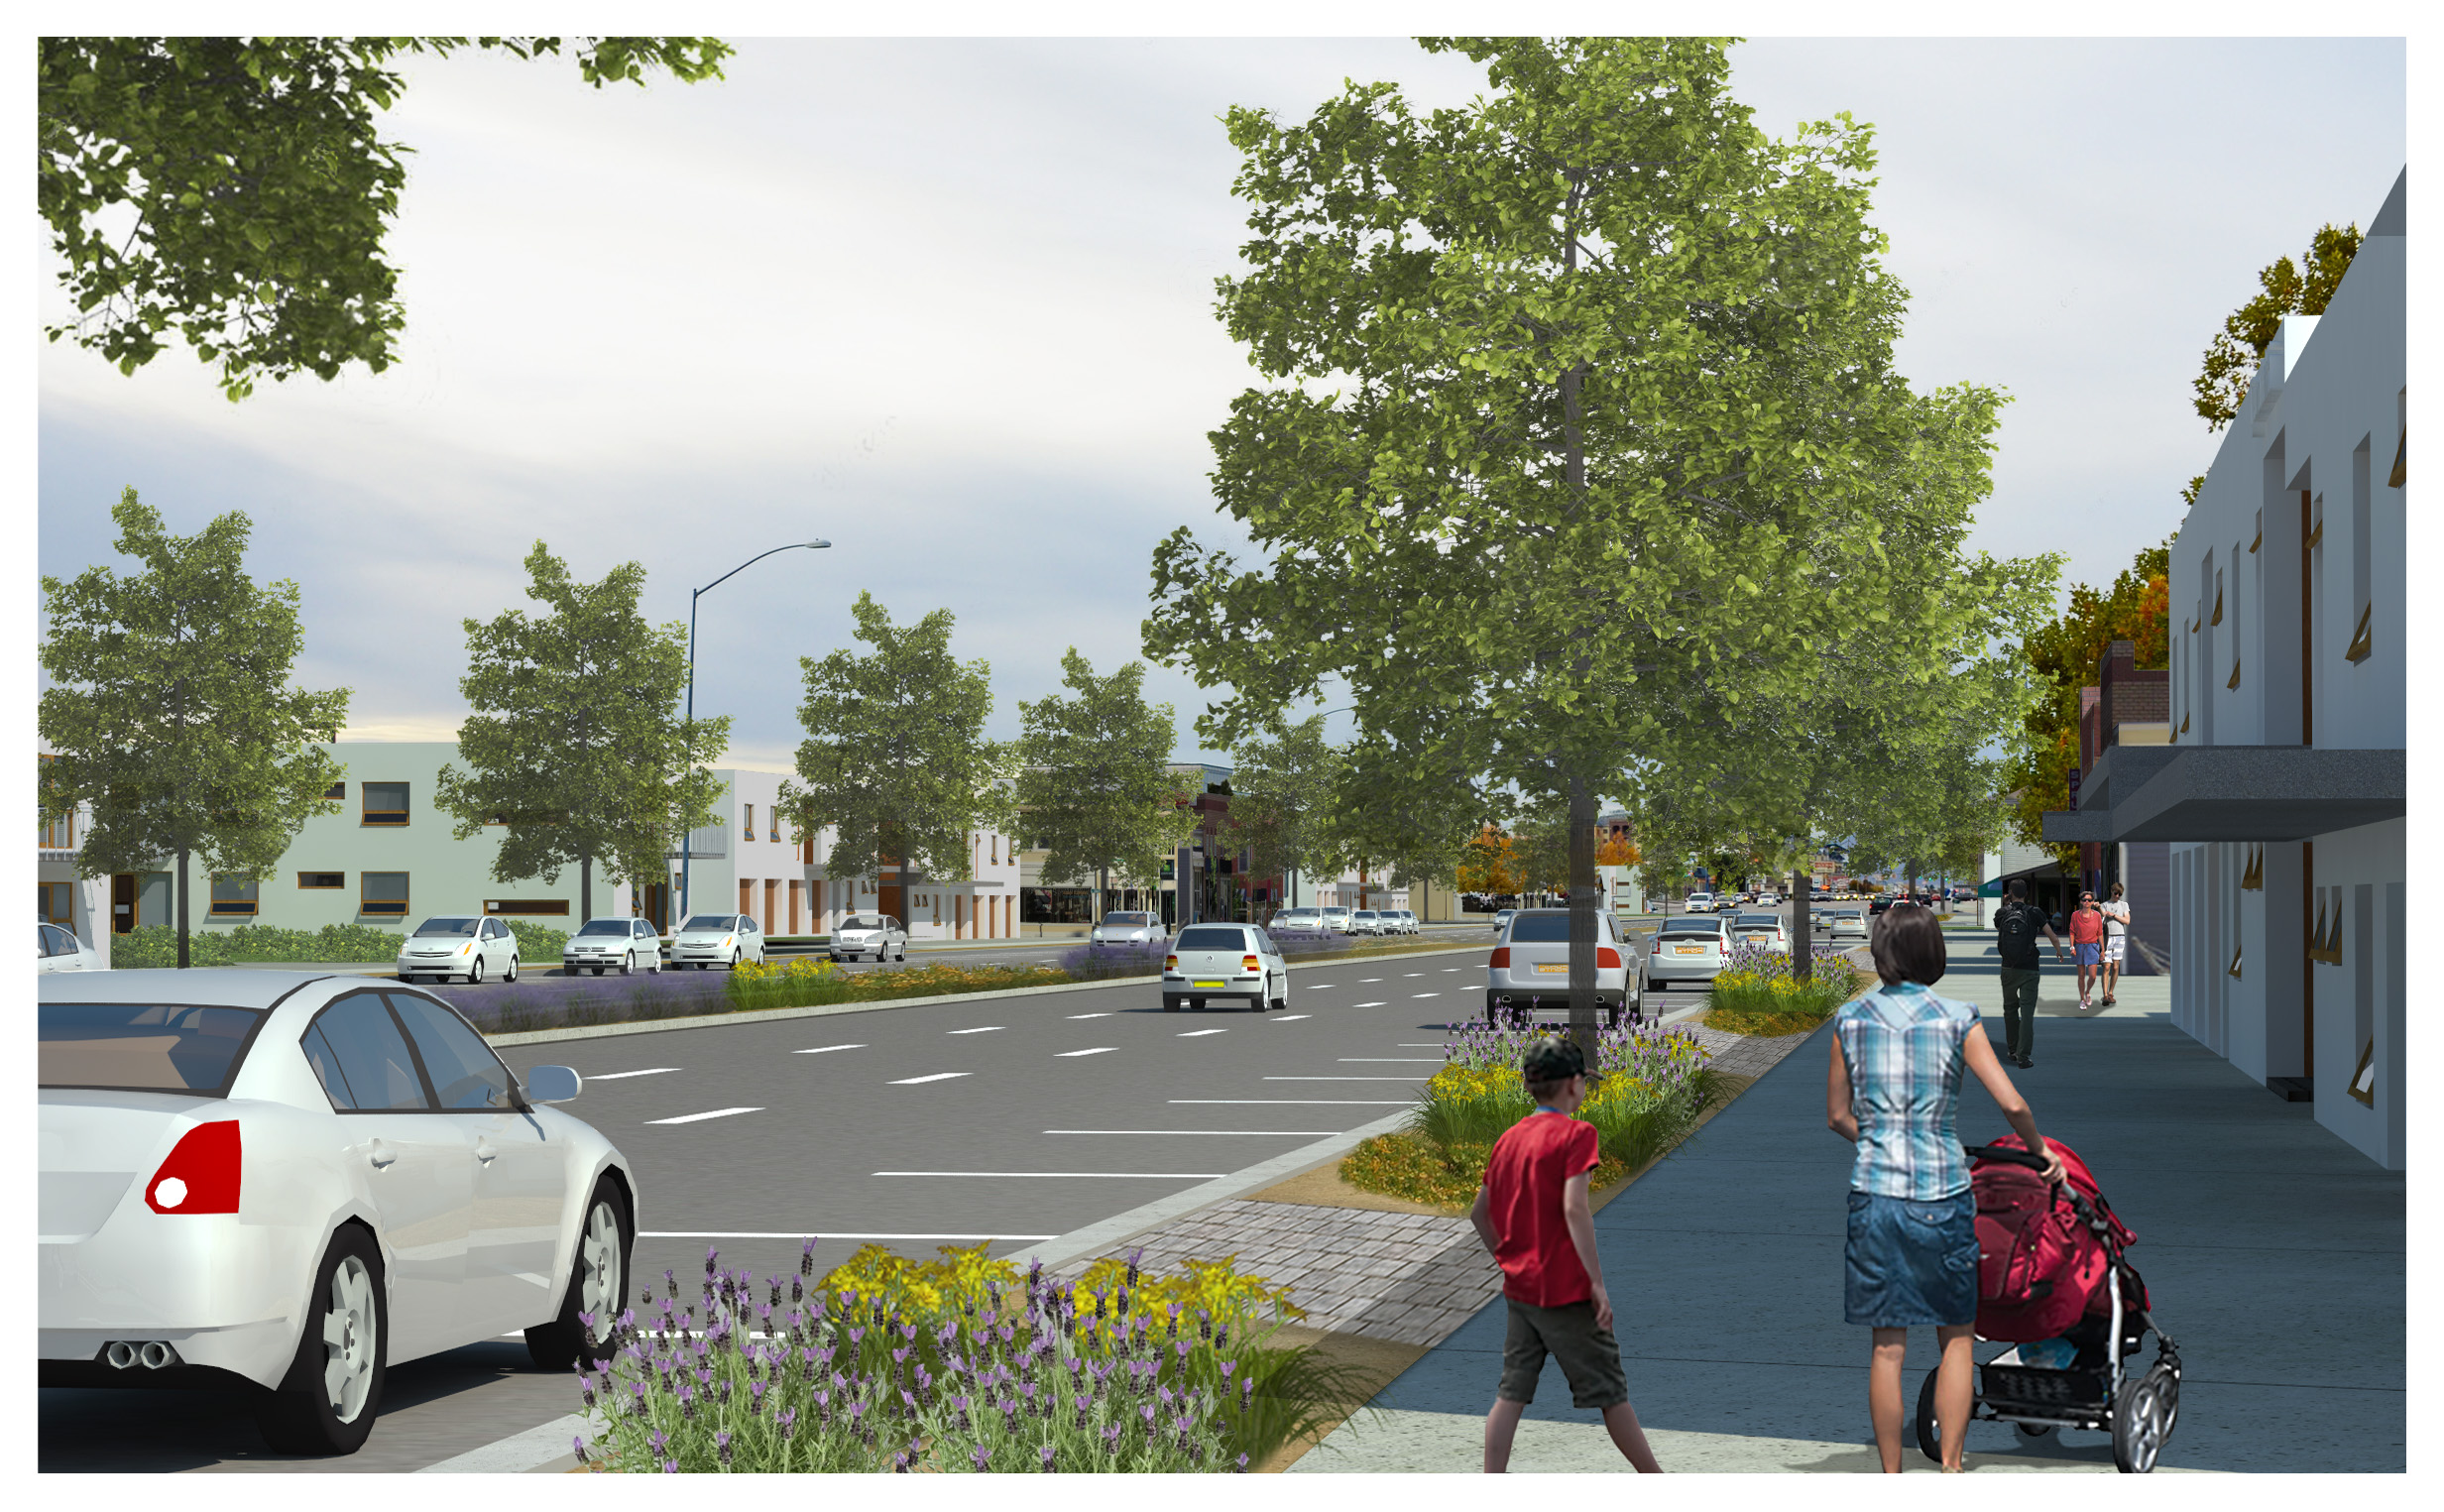 State Street Planning: The Boulevard Approach